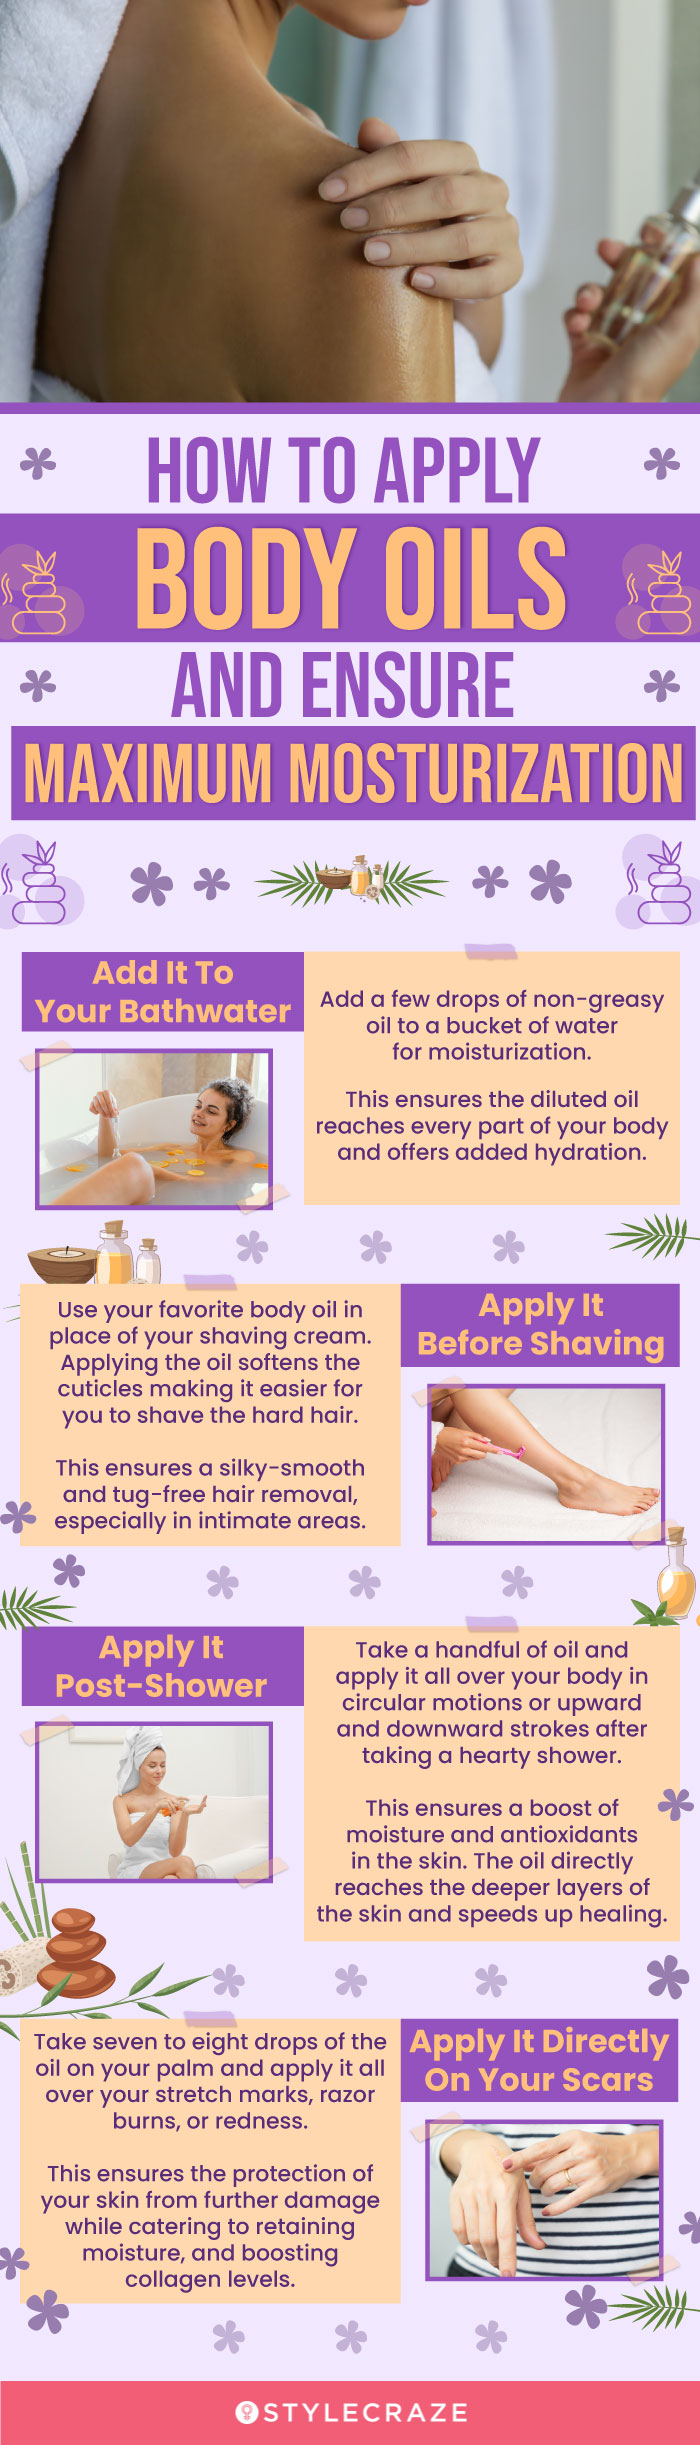 How To Apply Body Oils And Ensure Maximum Moisturization (infographic)